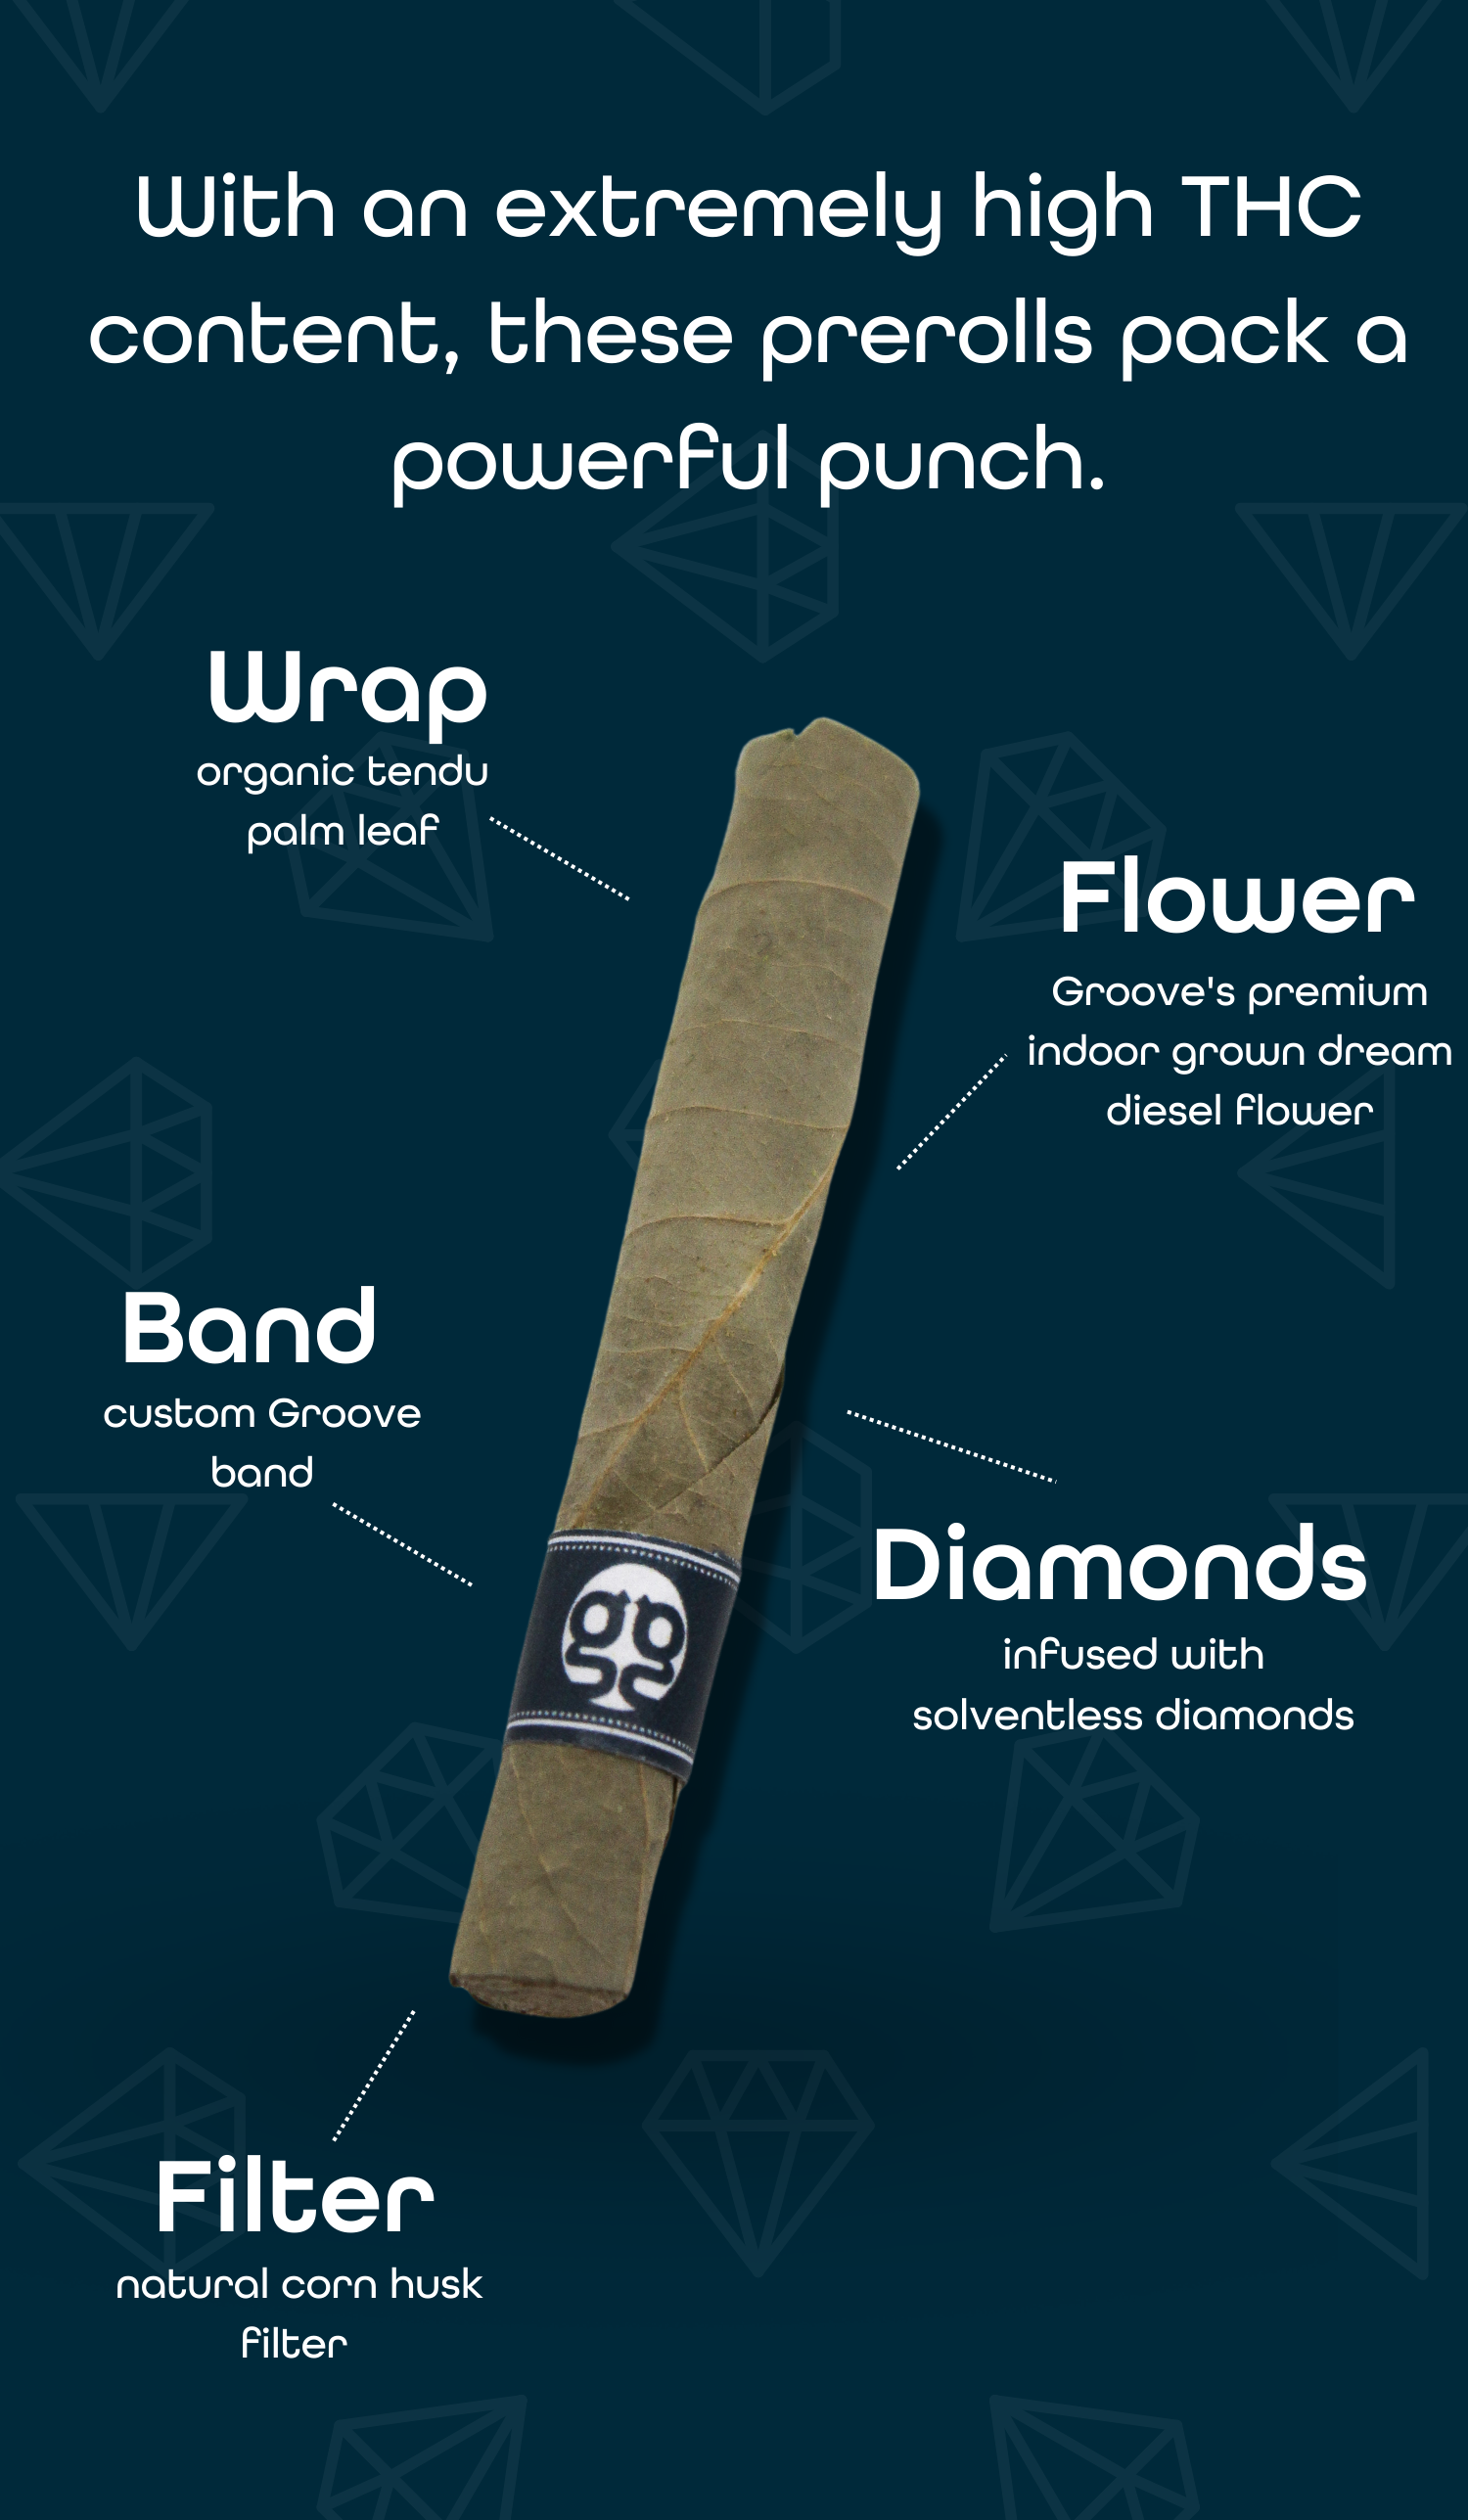 https://groovesolventless.com/wp-content/uploads/2023/01/23.01-13-Diamond-Infused-PreRolls-Missoula-Update-Graphic-2.png